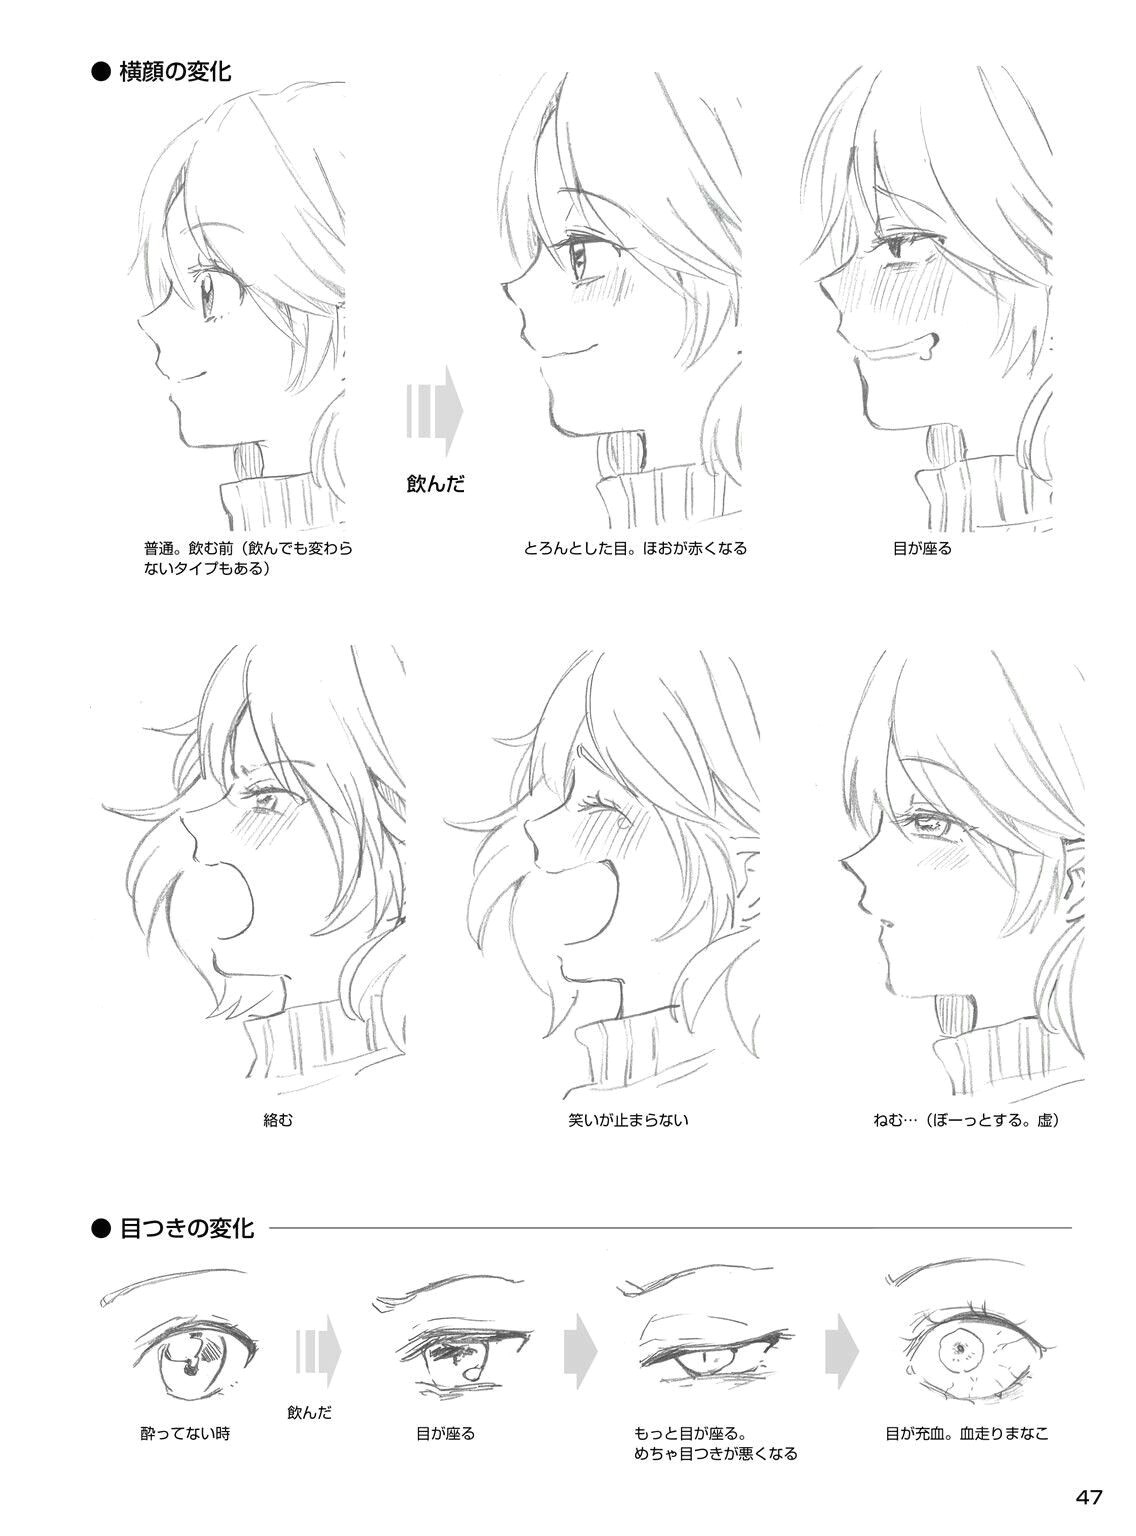 Drawing A Anime Head Pin by Wolf Drawing64 On Anime Manga Art Drawing Tips Pinterest